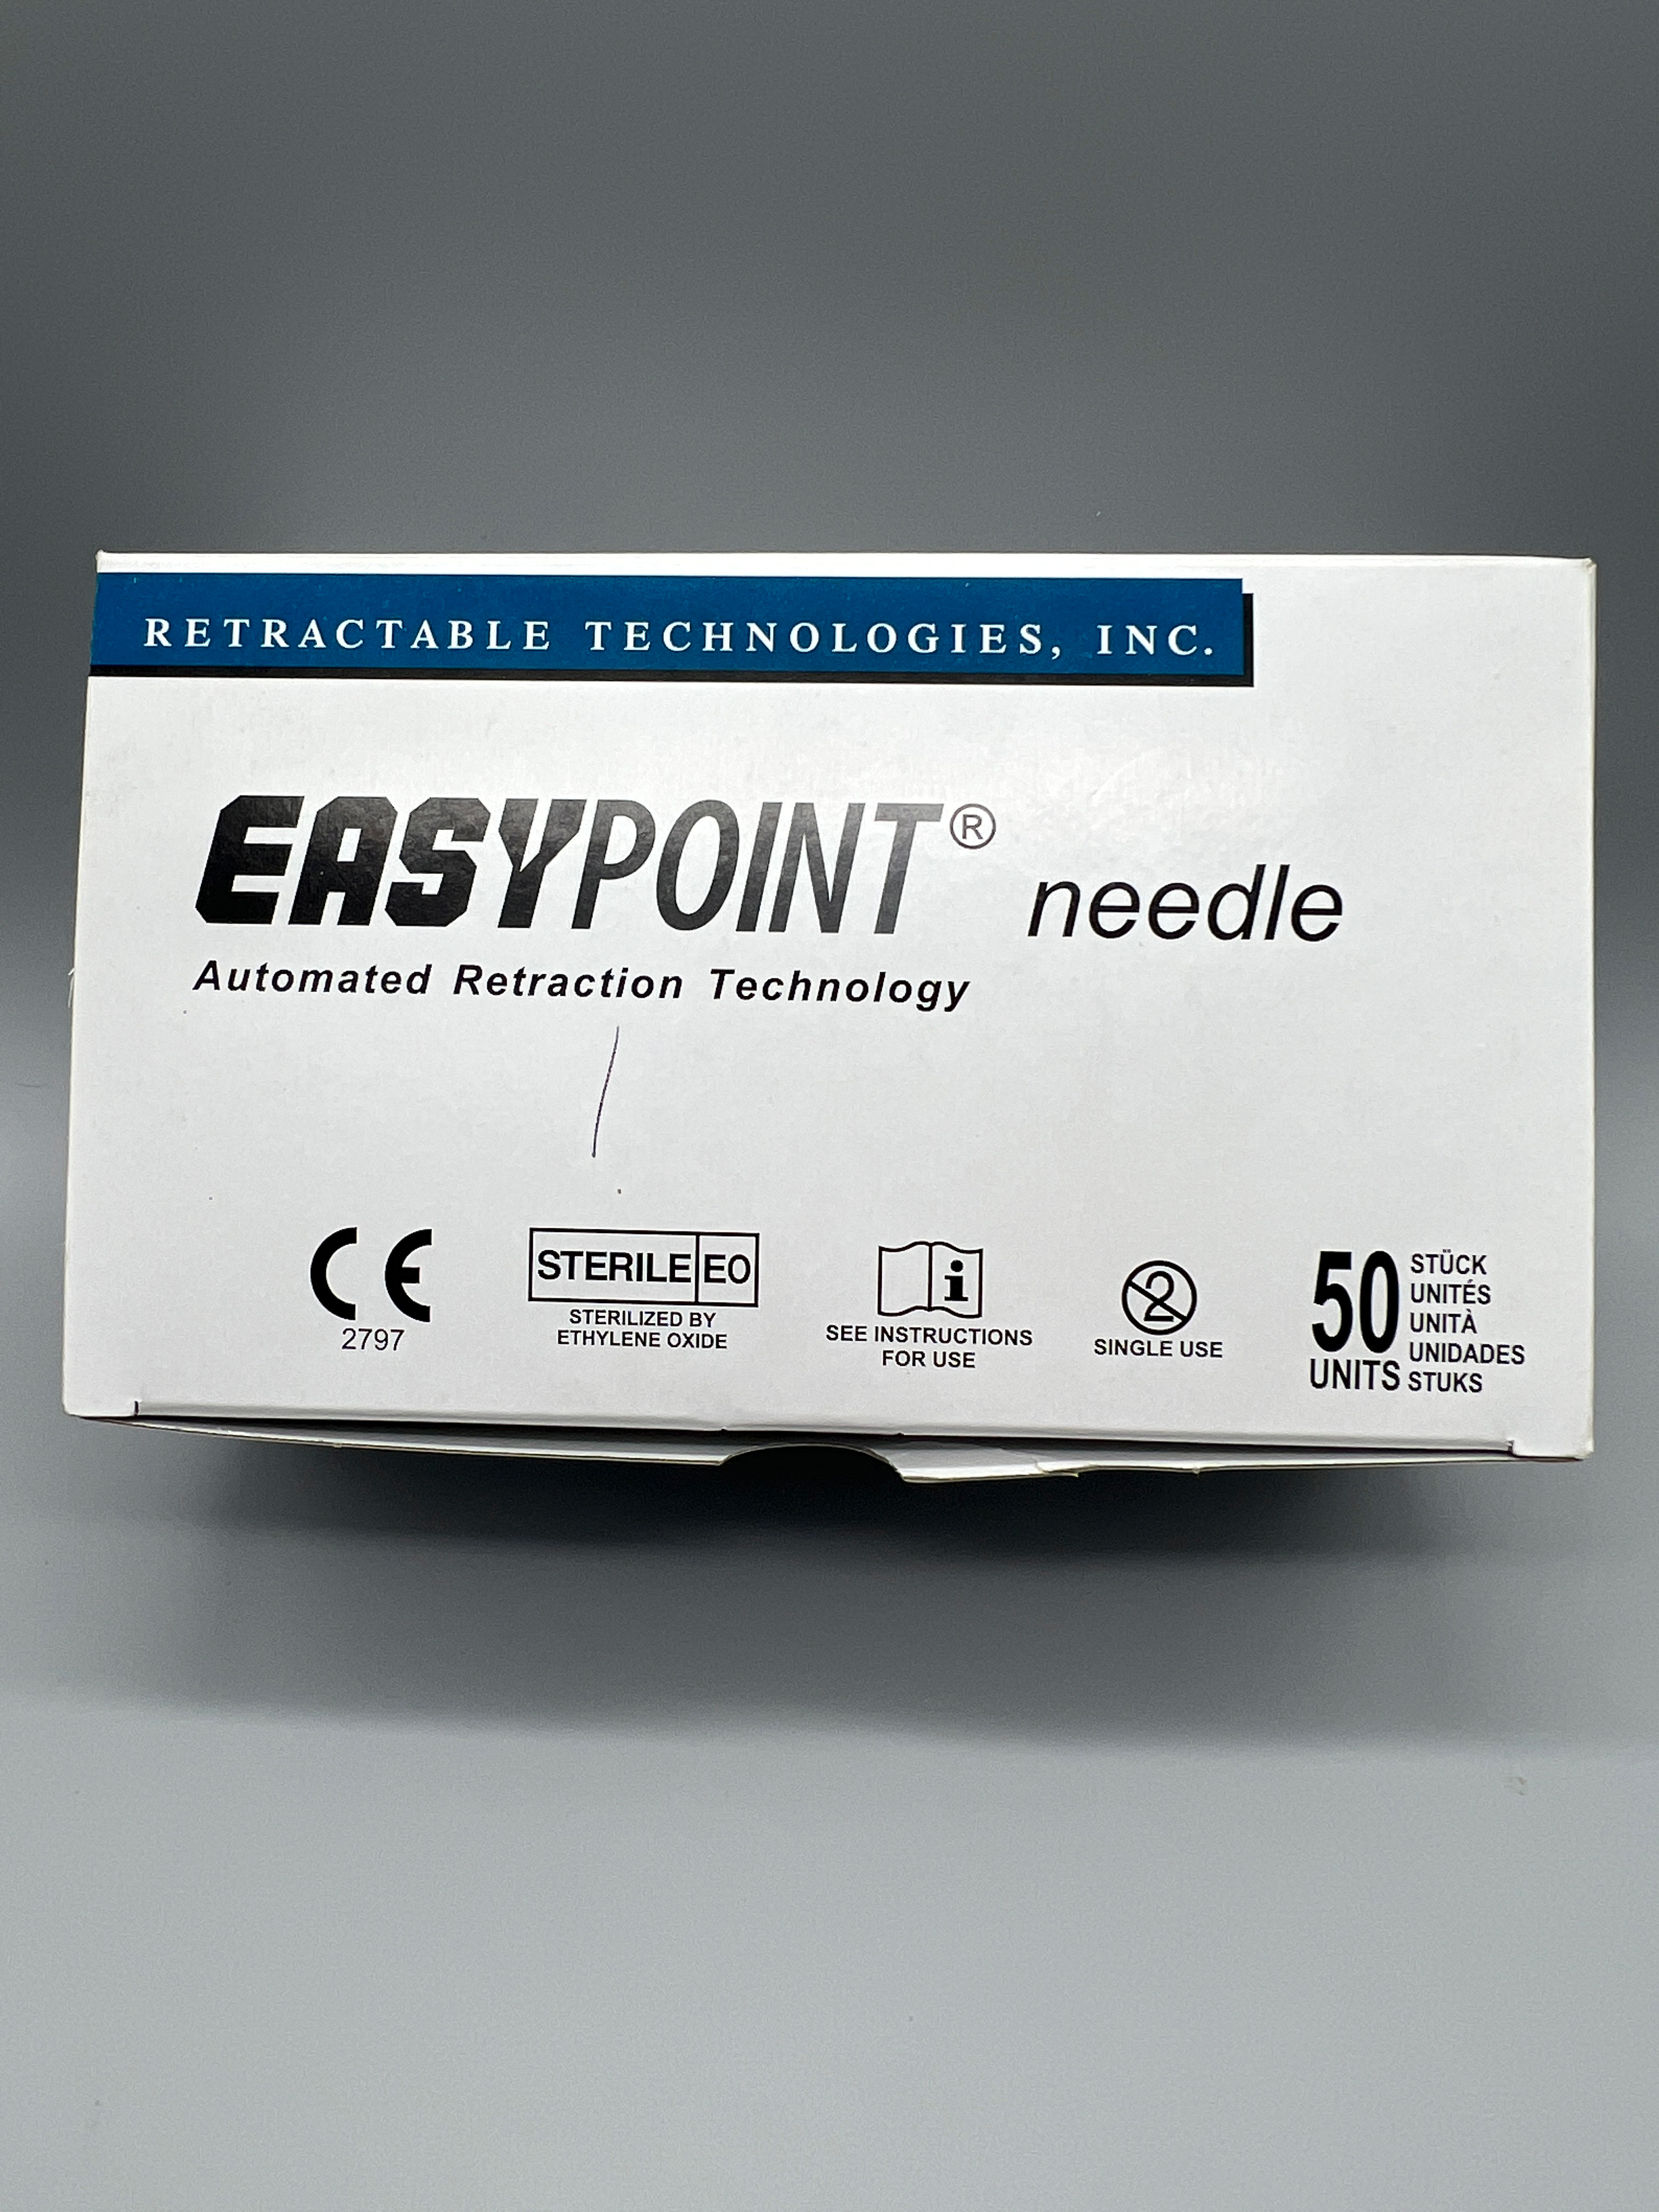 EASYPOINT NEEDLE AUTOMATED RETRACTION